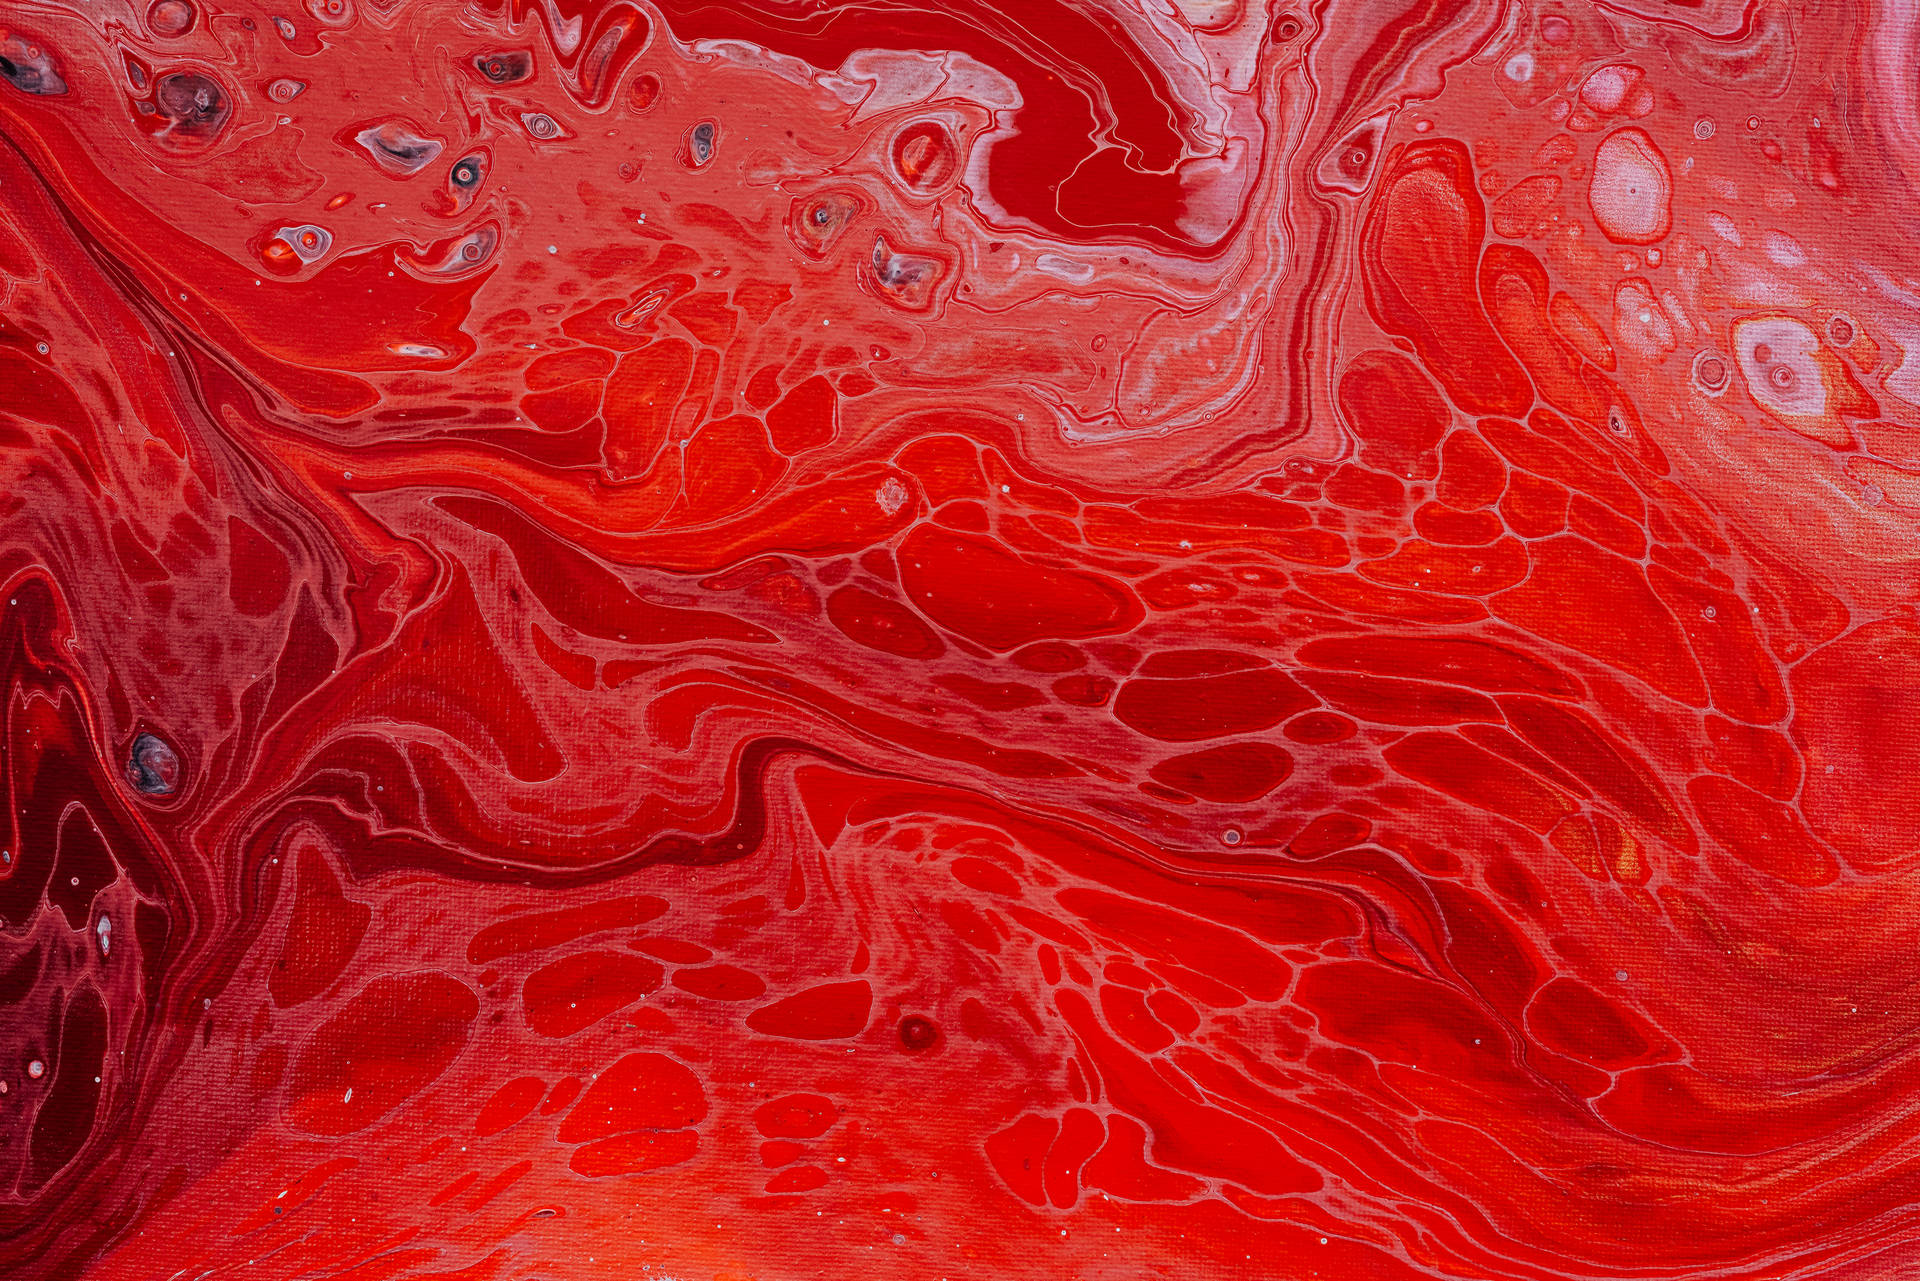 Red Abstract Fluid Painting